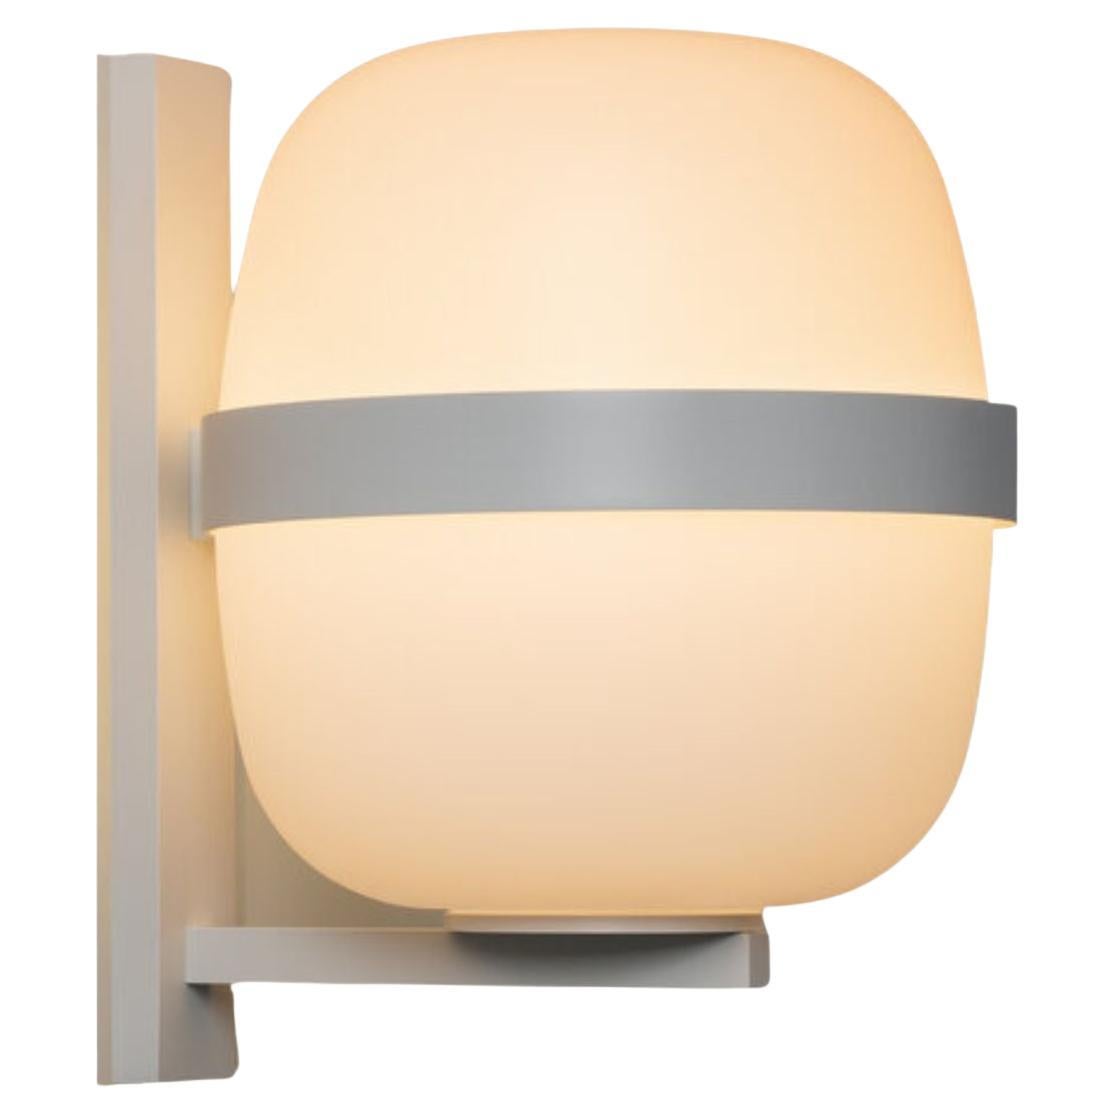 Contemporary Miguel Milá 'Wally Cesta' Wall Lamp in Opal and Black for Santa & Cole For Sale